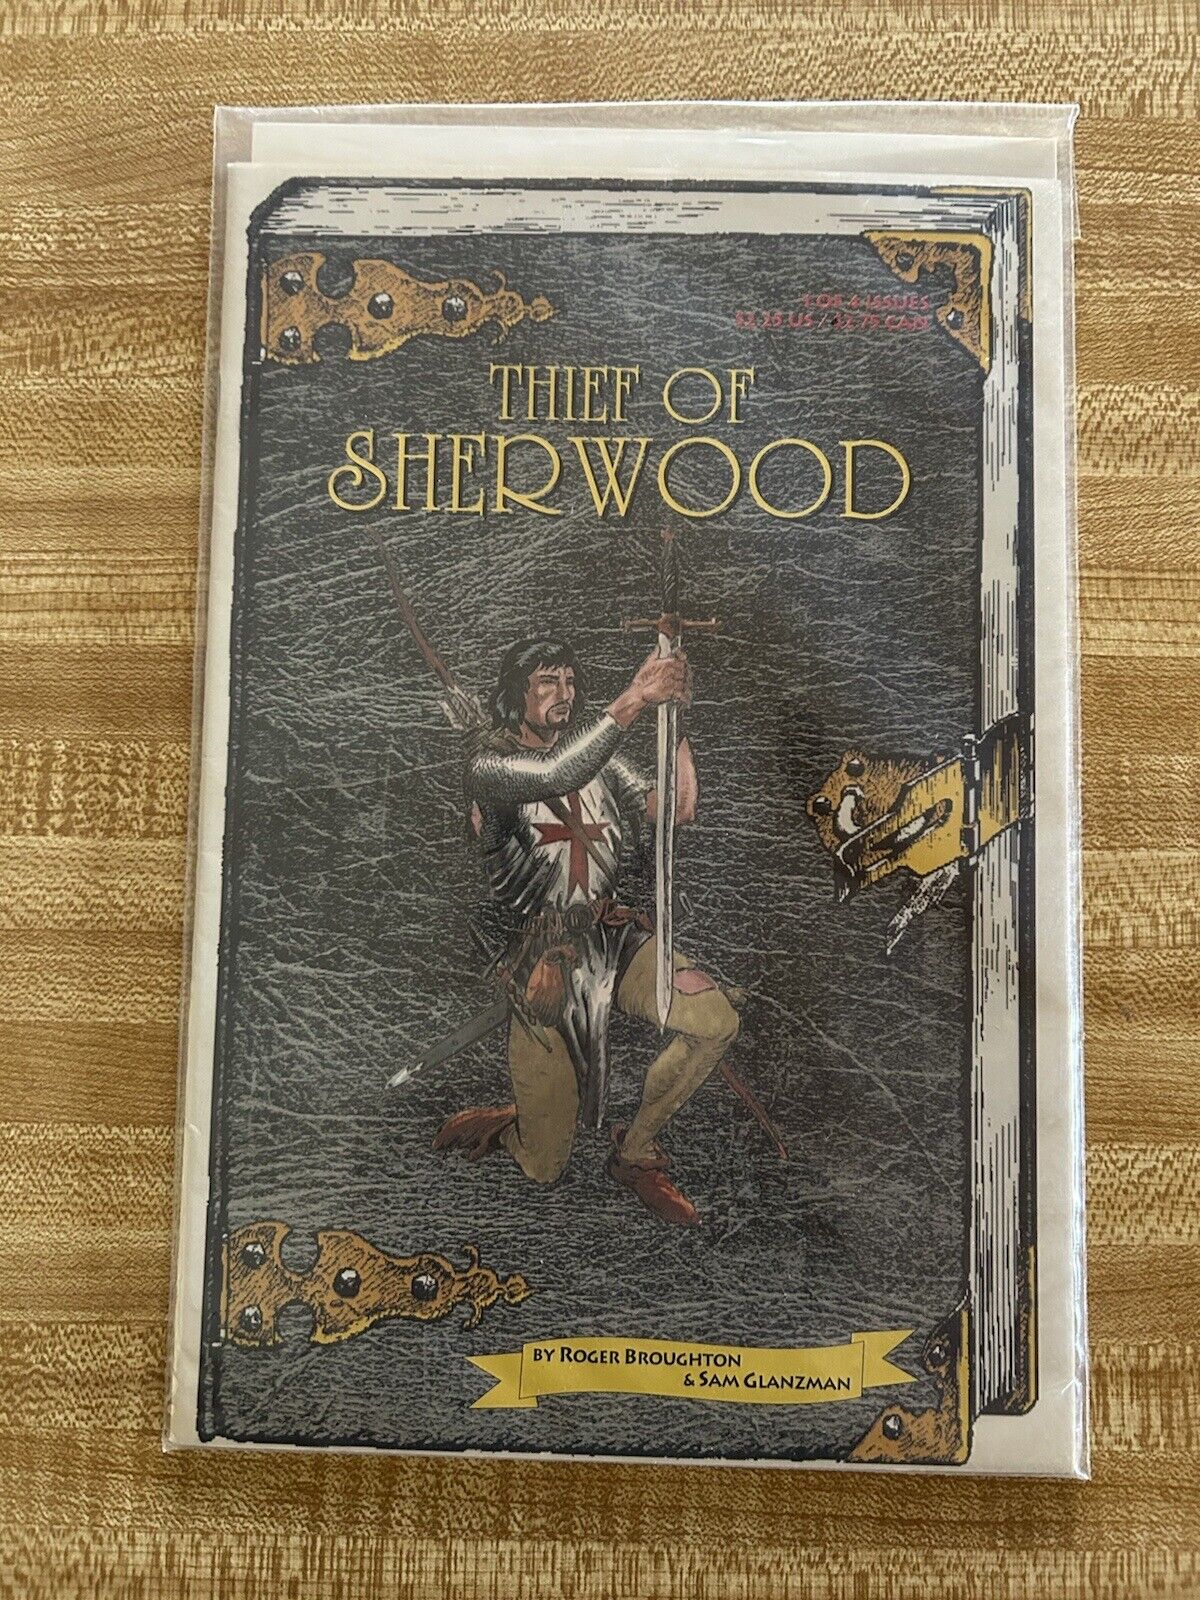 THIEF OF SHERWOOD #1 SIGNATURES BY BROUGHTON AND GLANZMAN + REAL PICTURE OF BOTH